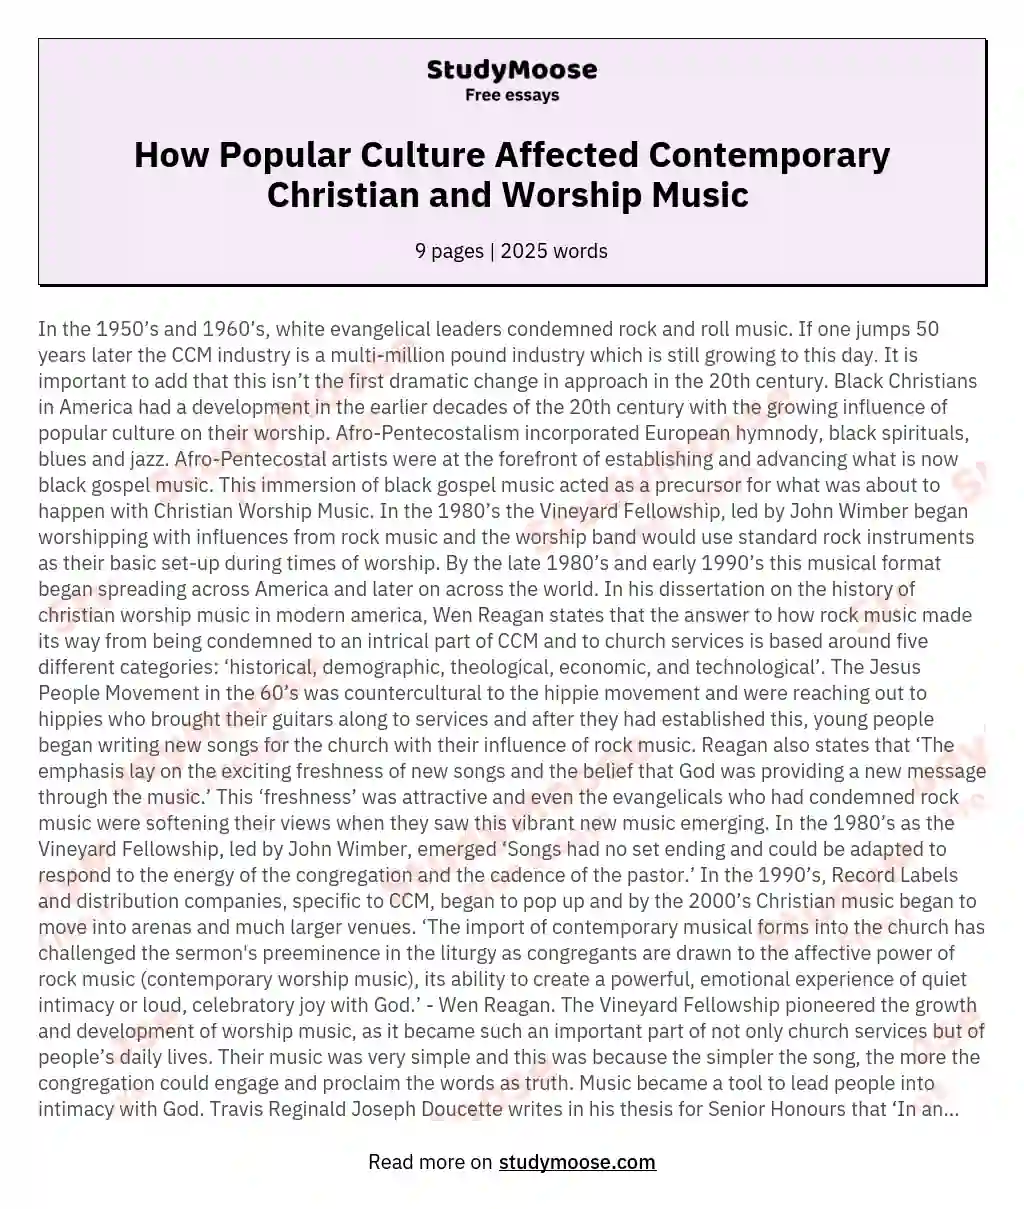 How Popular Culture Affected Contemporary Christian and Worship Music  essay